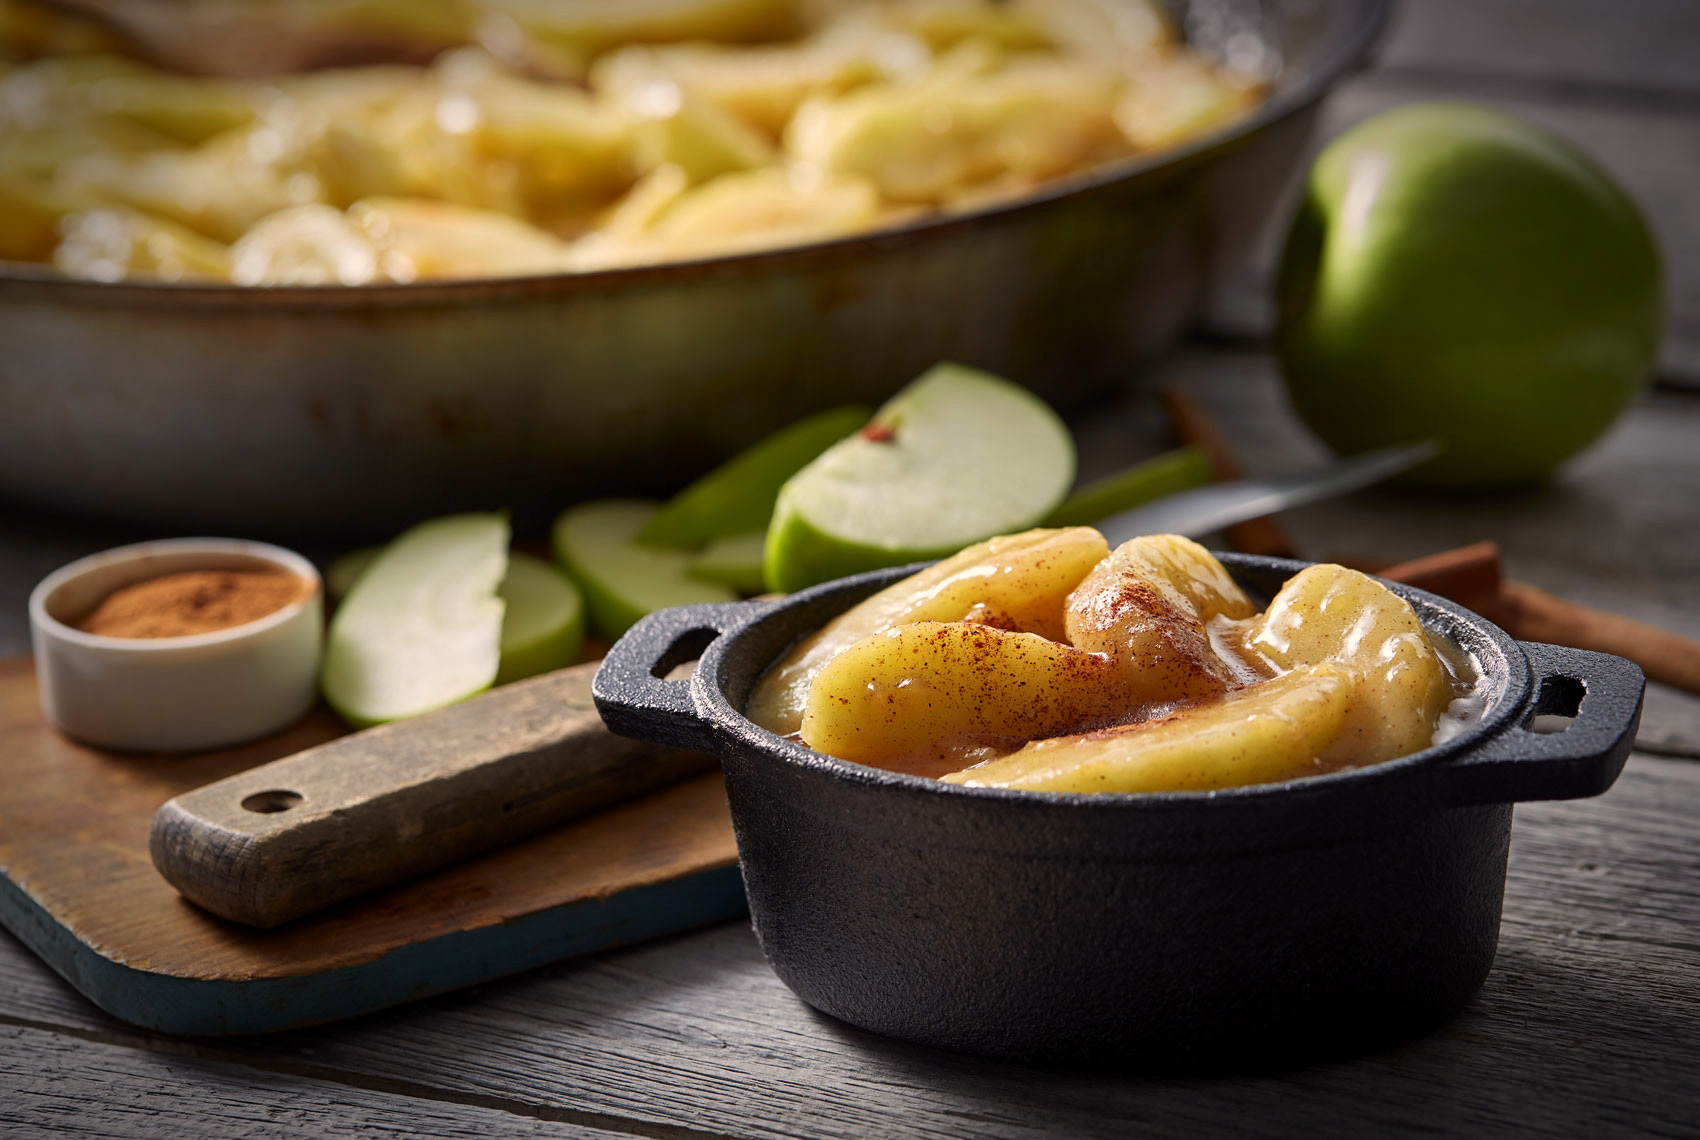 Baked apples/cinnamon/small cast iron dish/food photography